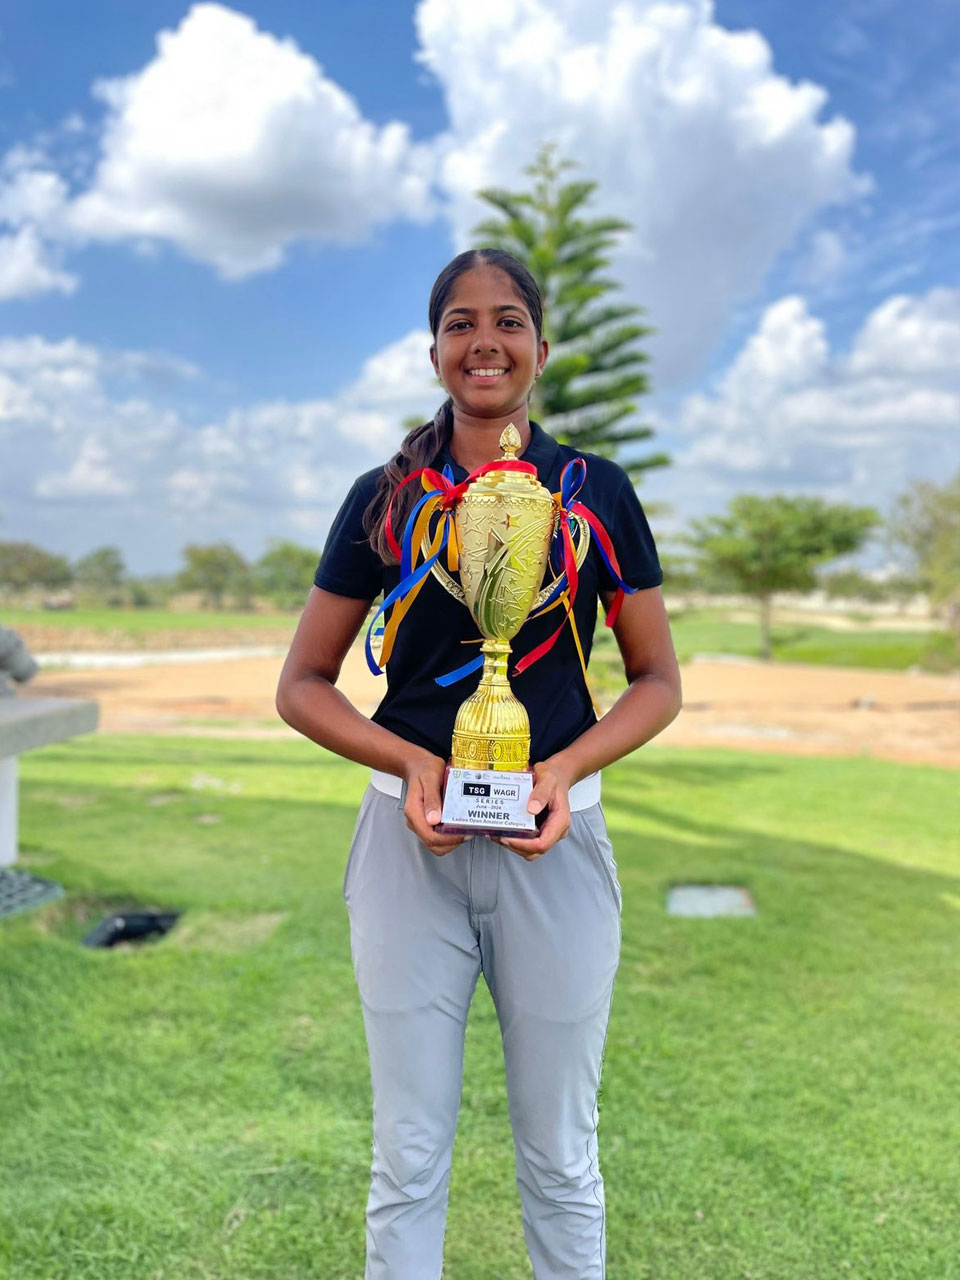 Kaya Daluwatte won the open Girls Category and also finished as runner up in the mixed TSG WAGR Series at Zion Hills.